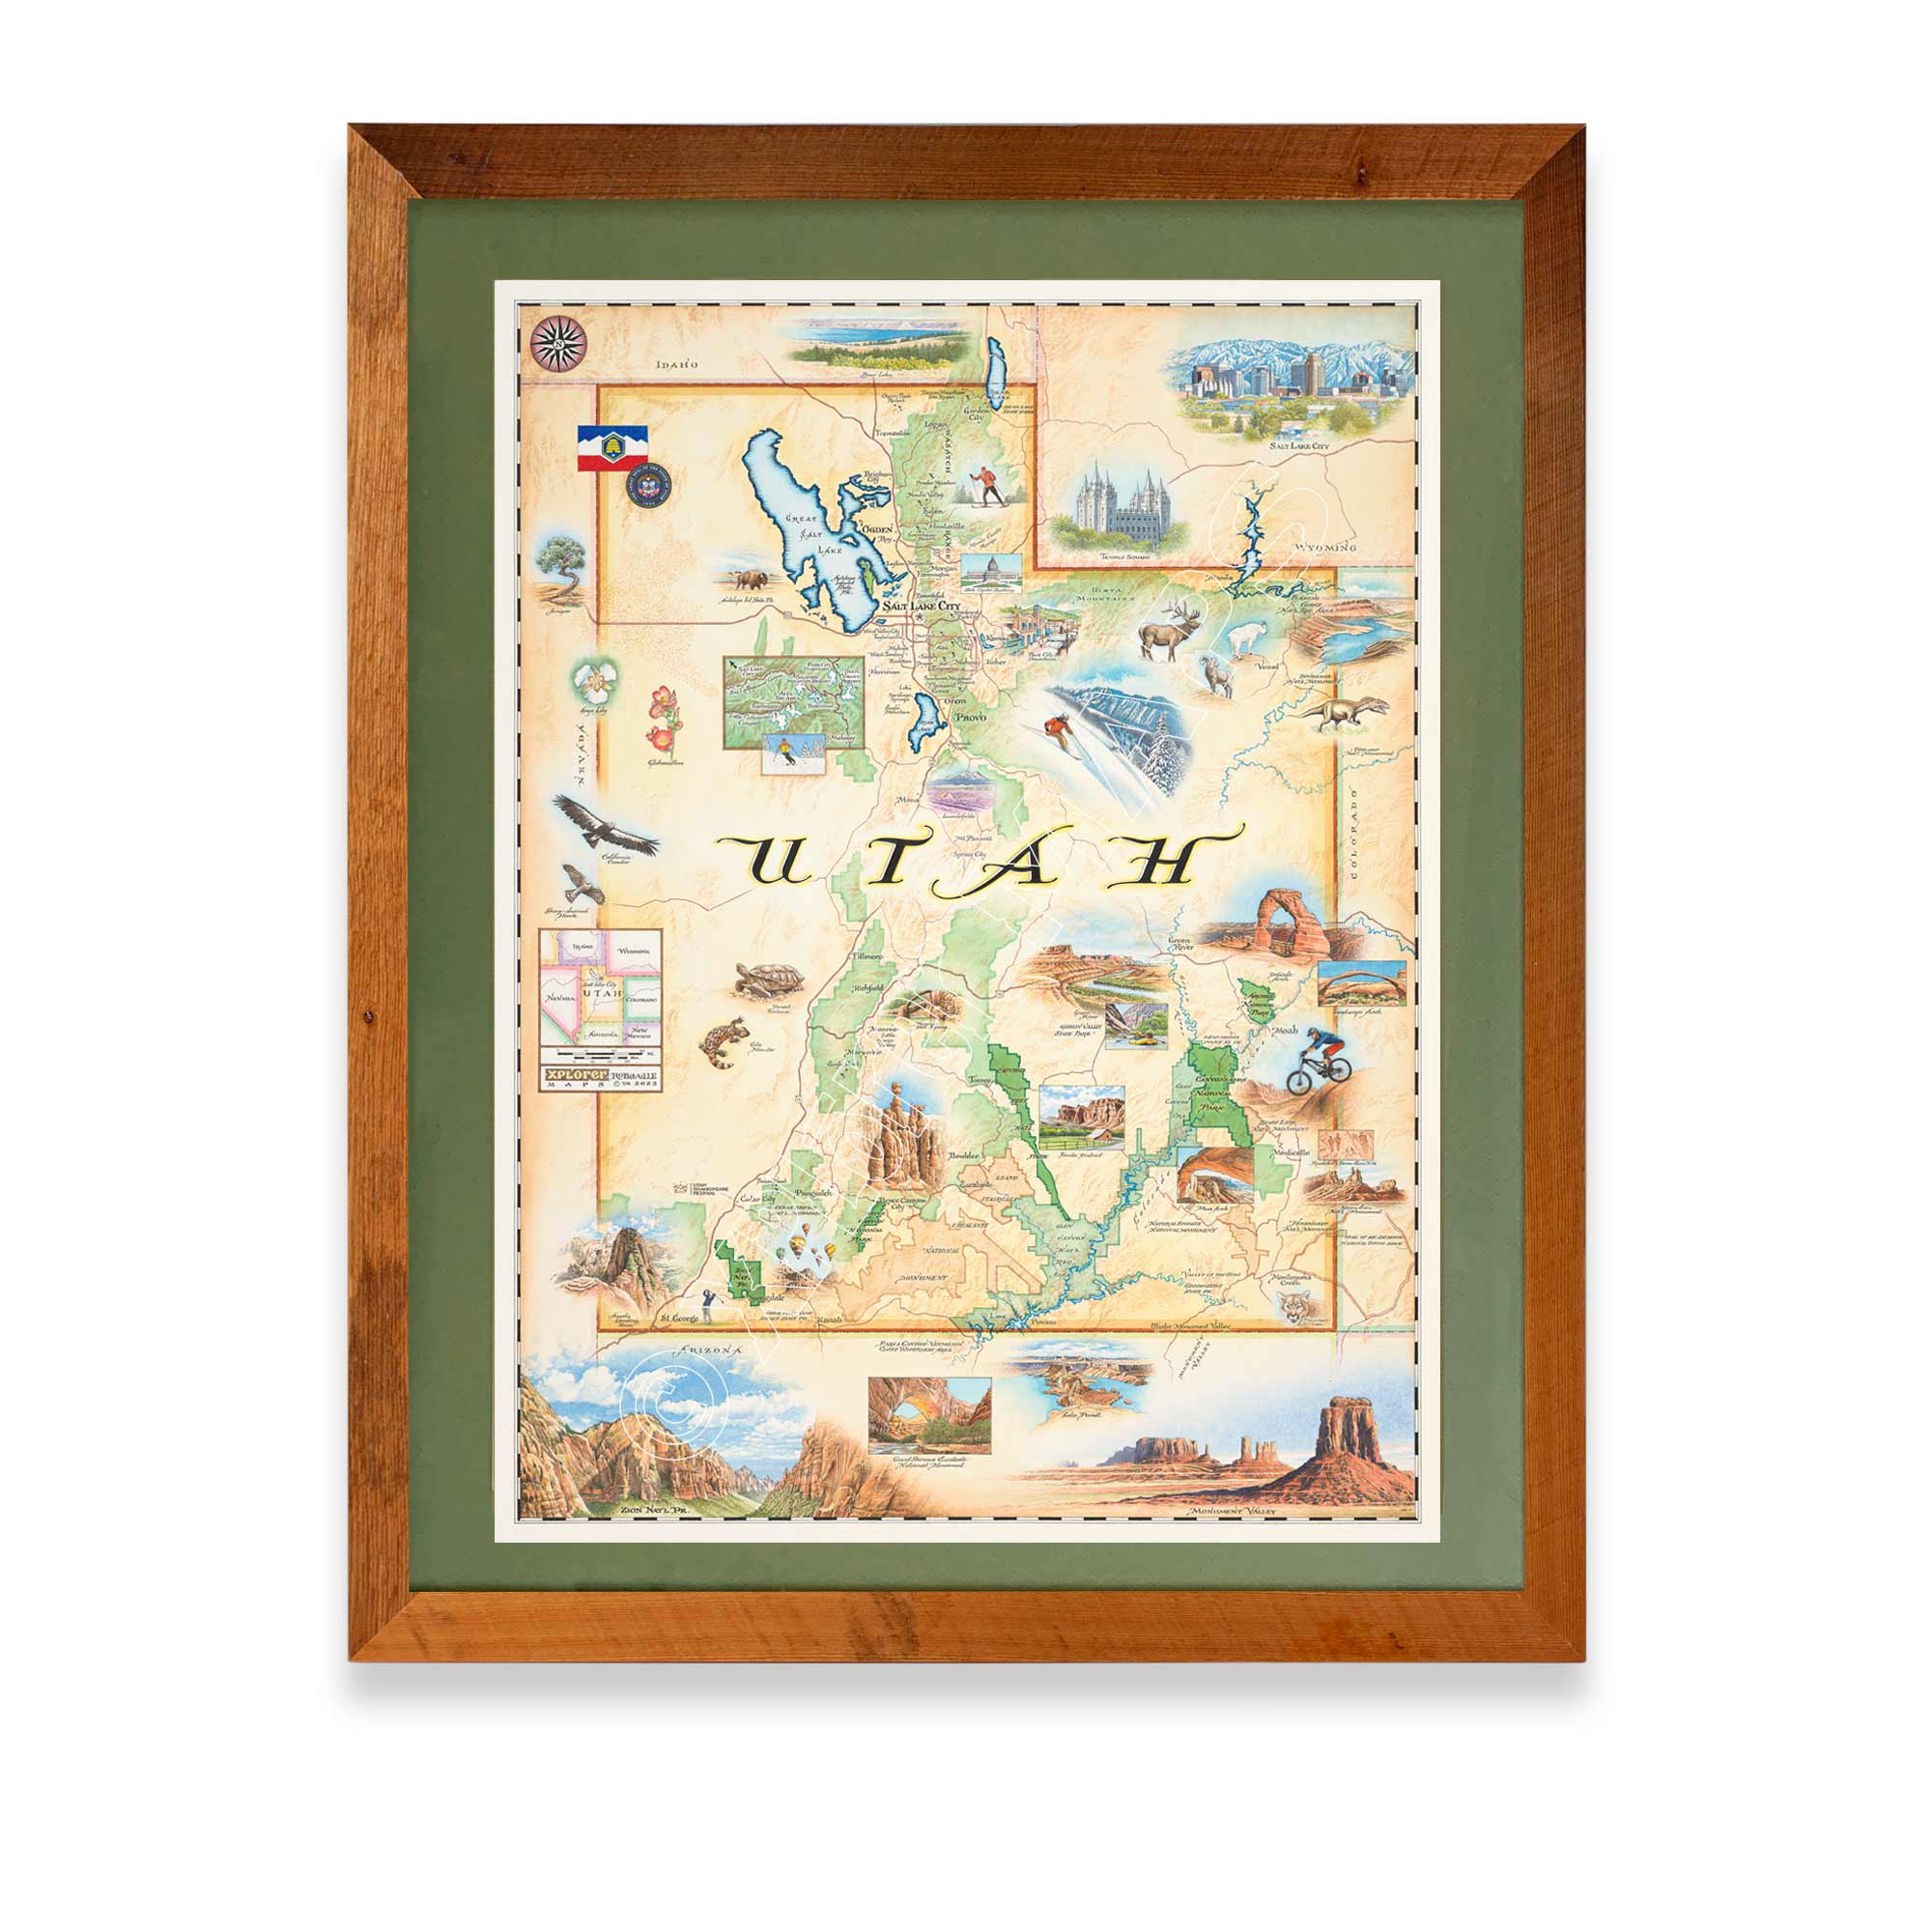 Utah State hand-drawn map in earth tones blues and greens. The map print is framed in reclaimed Montana Flathead Lake Larch with a green mat.